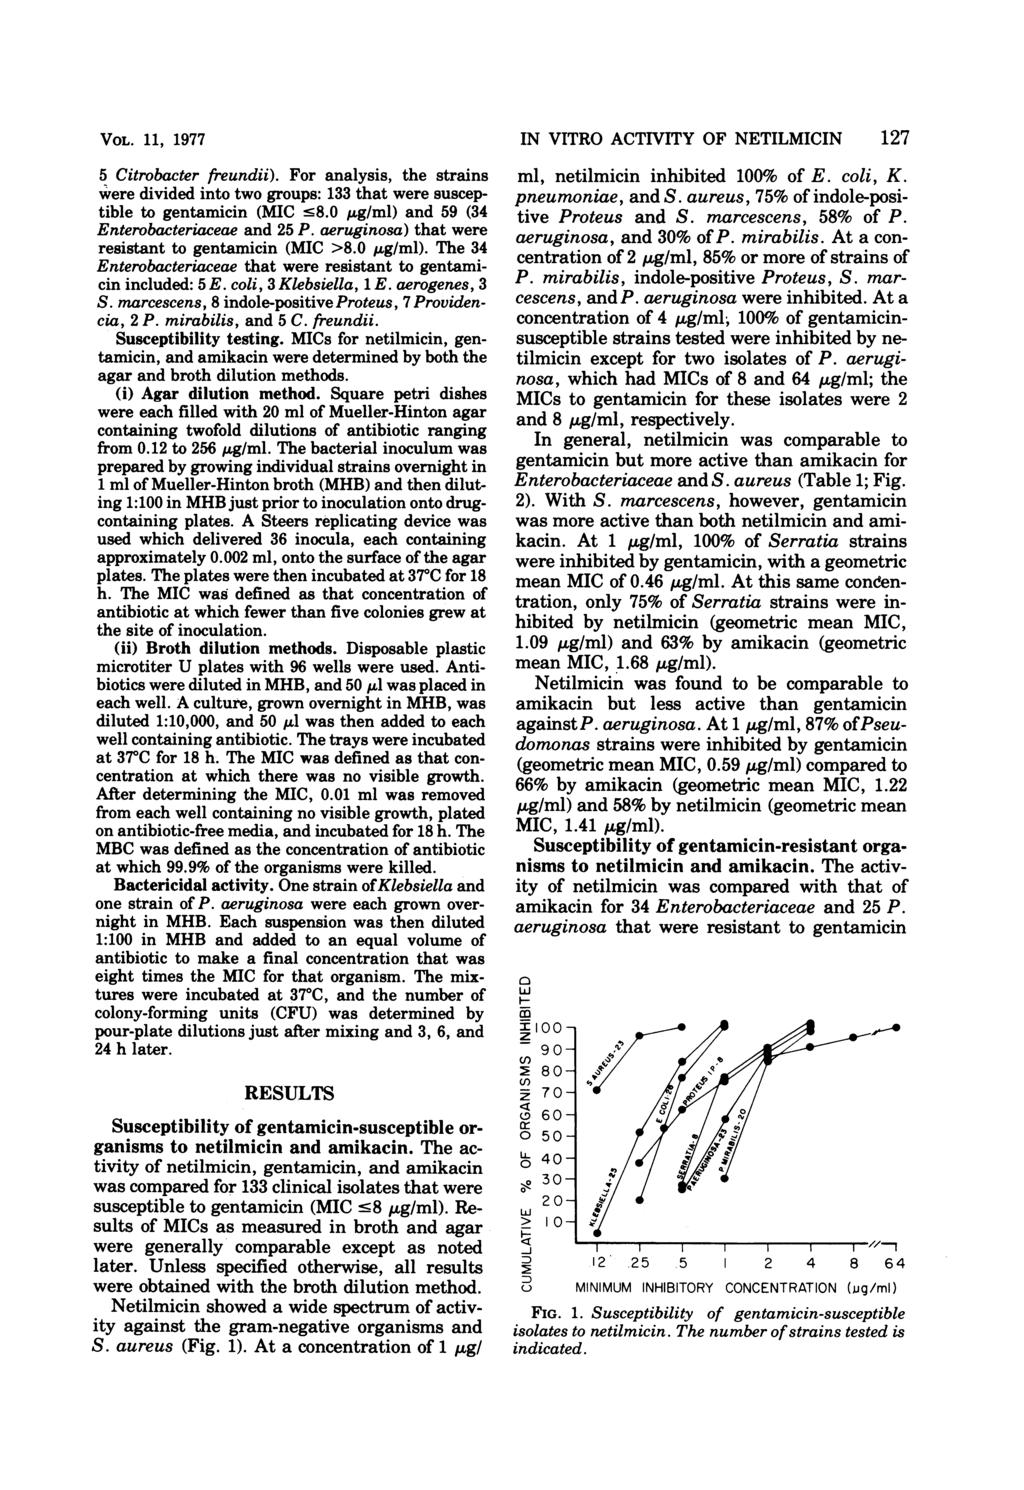 VOL. 11, 1977 5 Citrobacter freundii). For analysis, the strains were divided into two groups: 133 that were susceptible to gentamicin (MIC -8.,g/ml) and 59 (34 Enterobacteriaceae and 25 P.